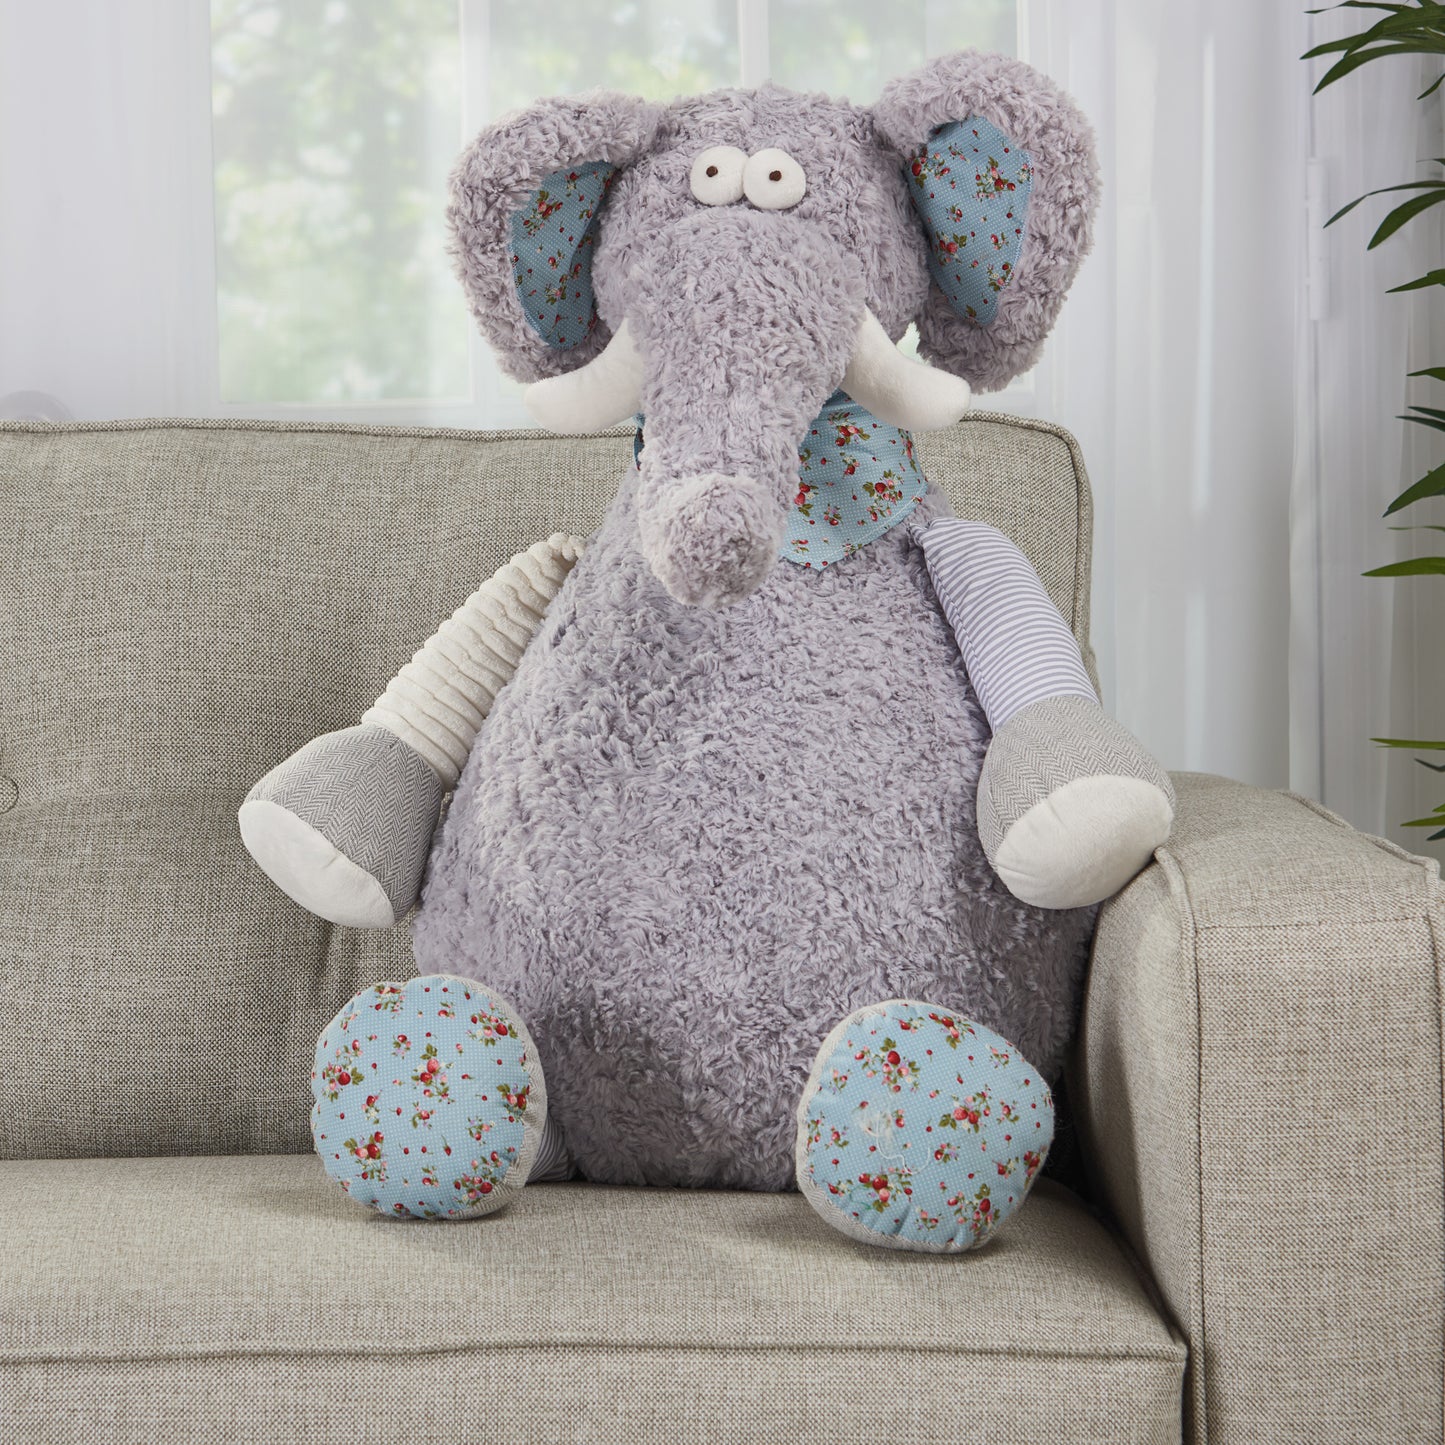 Plush Lines N1463 Synthetic Blend Elephant Plush Toy Throw Pillow From Mina Victory By Nourison Rugs